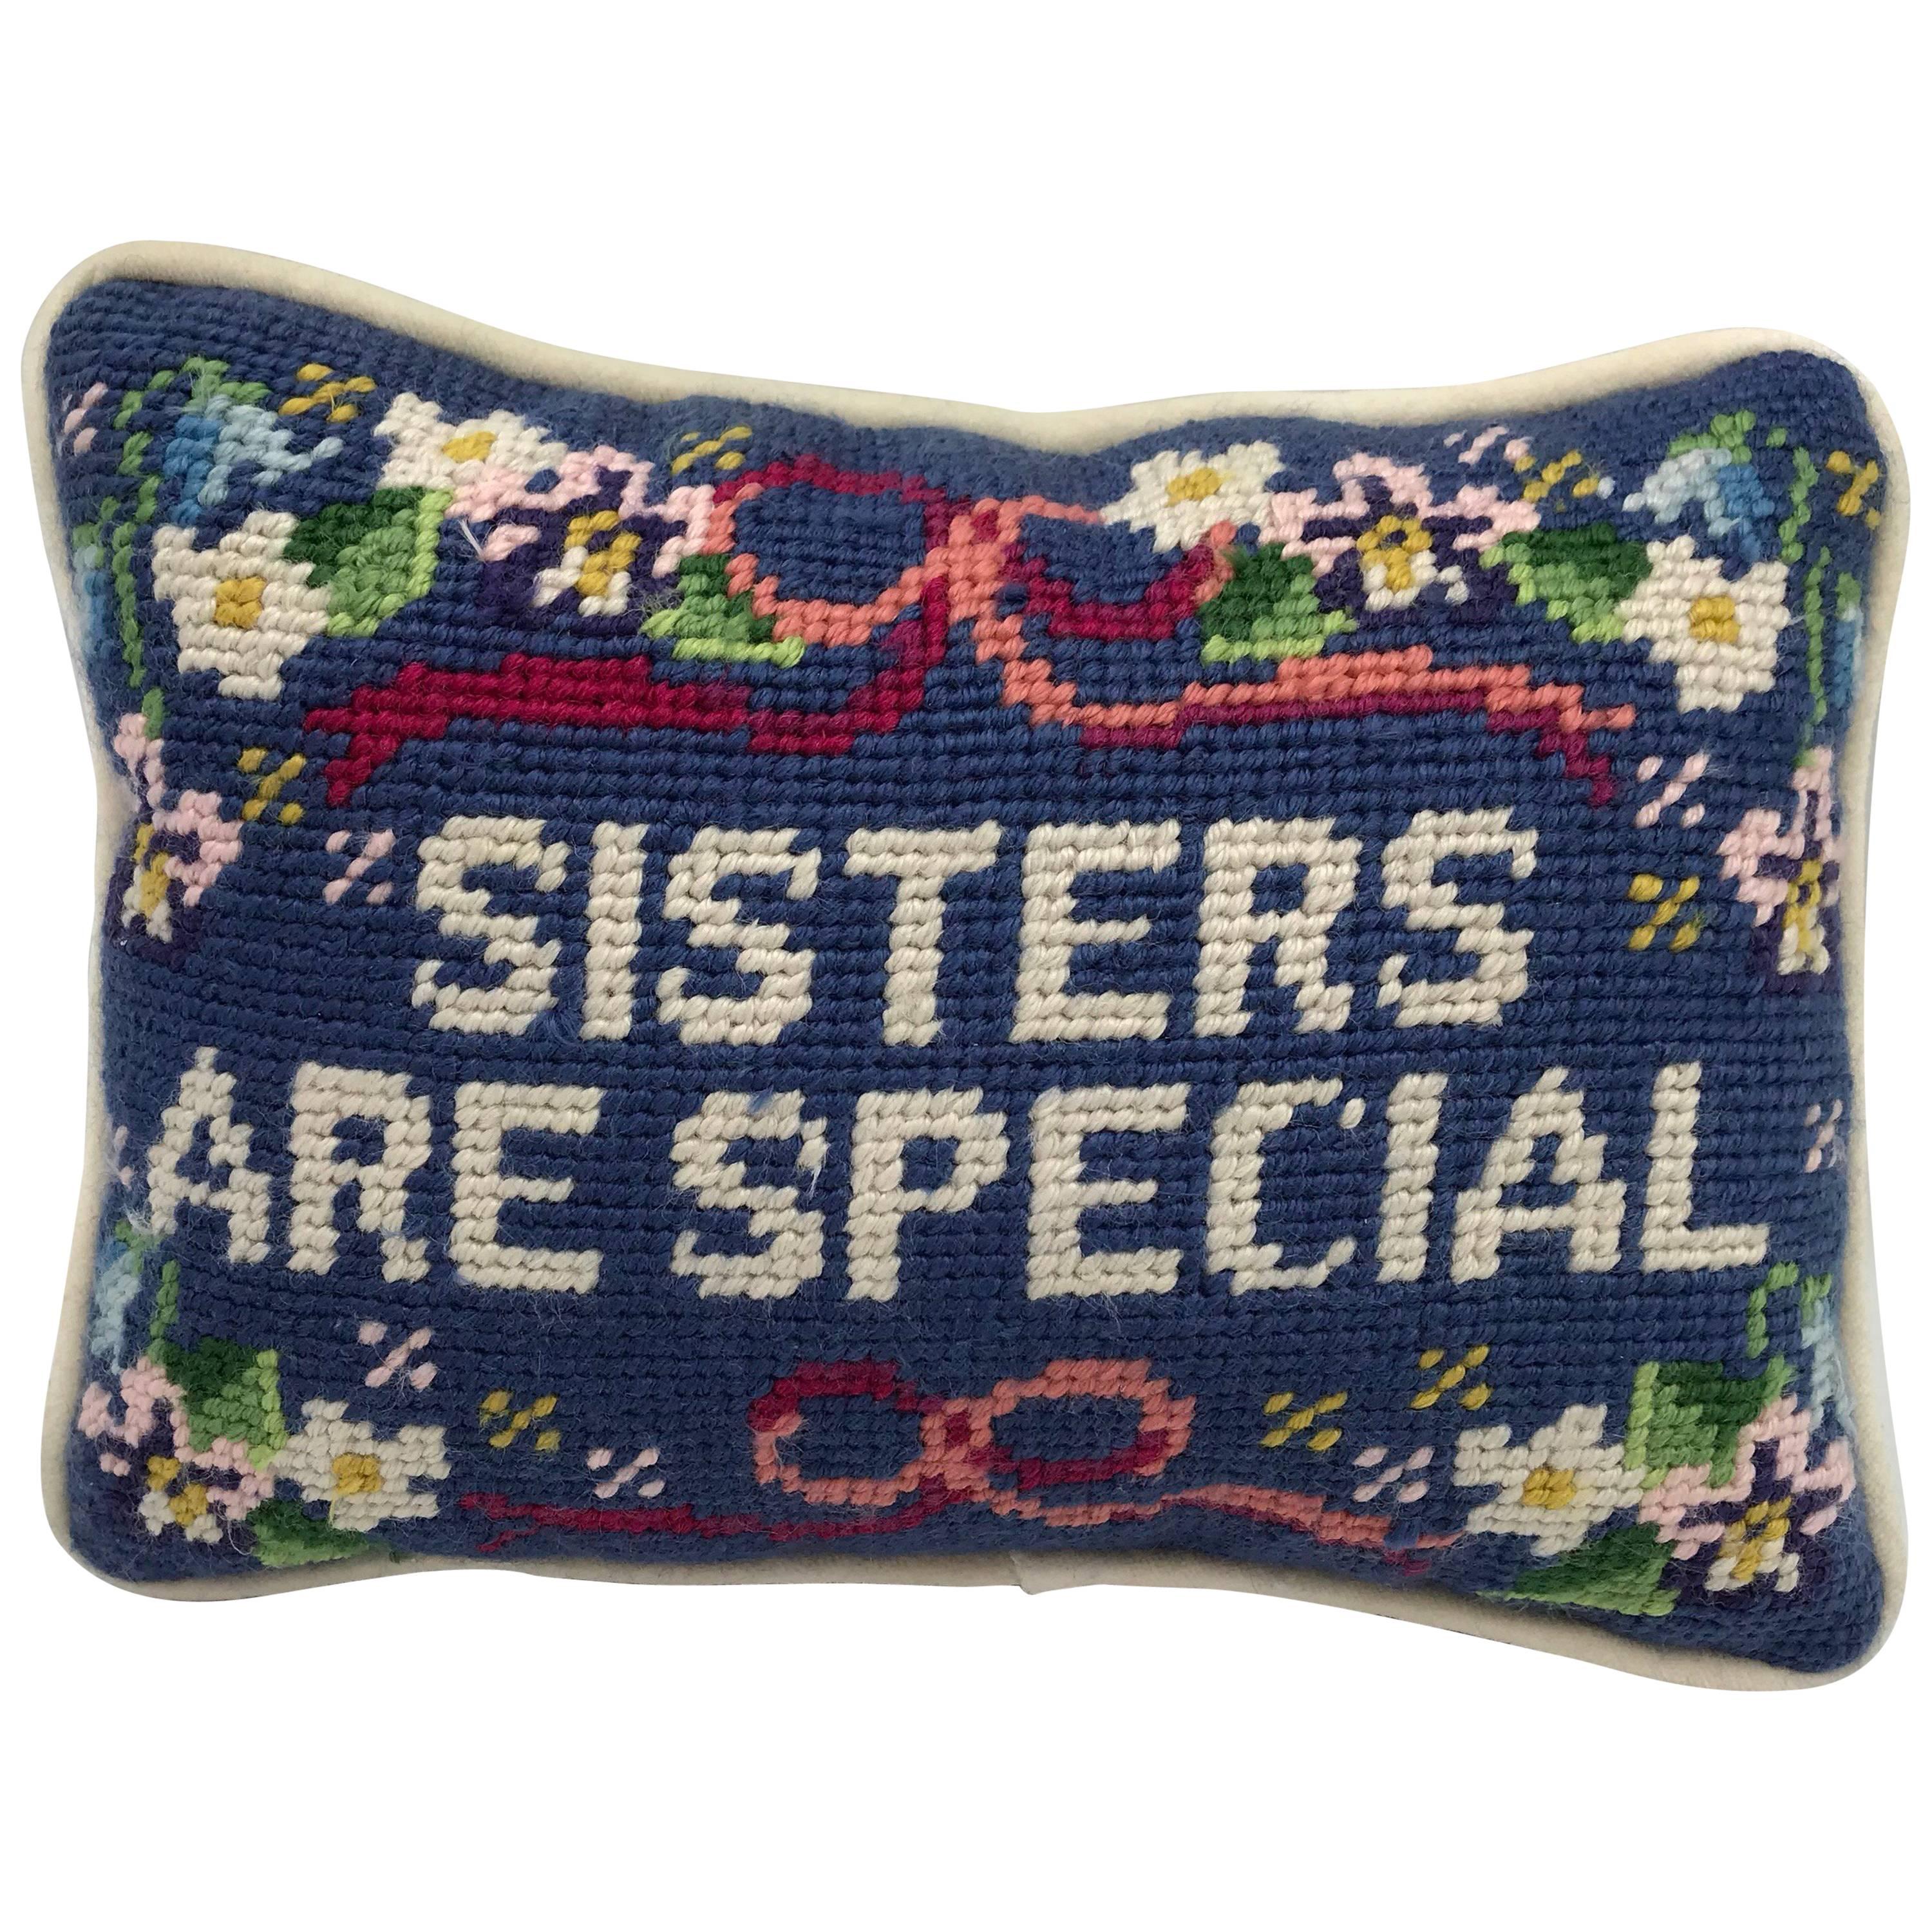 1970s ‘Sisters are Special’ Needlepoint Pillow